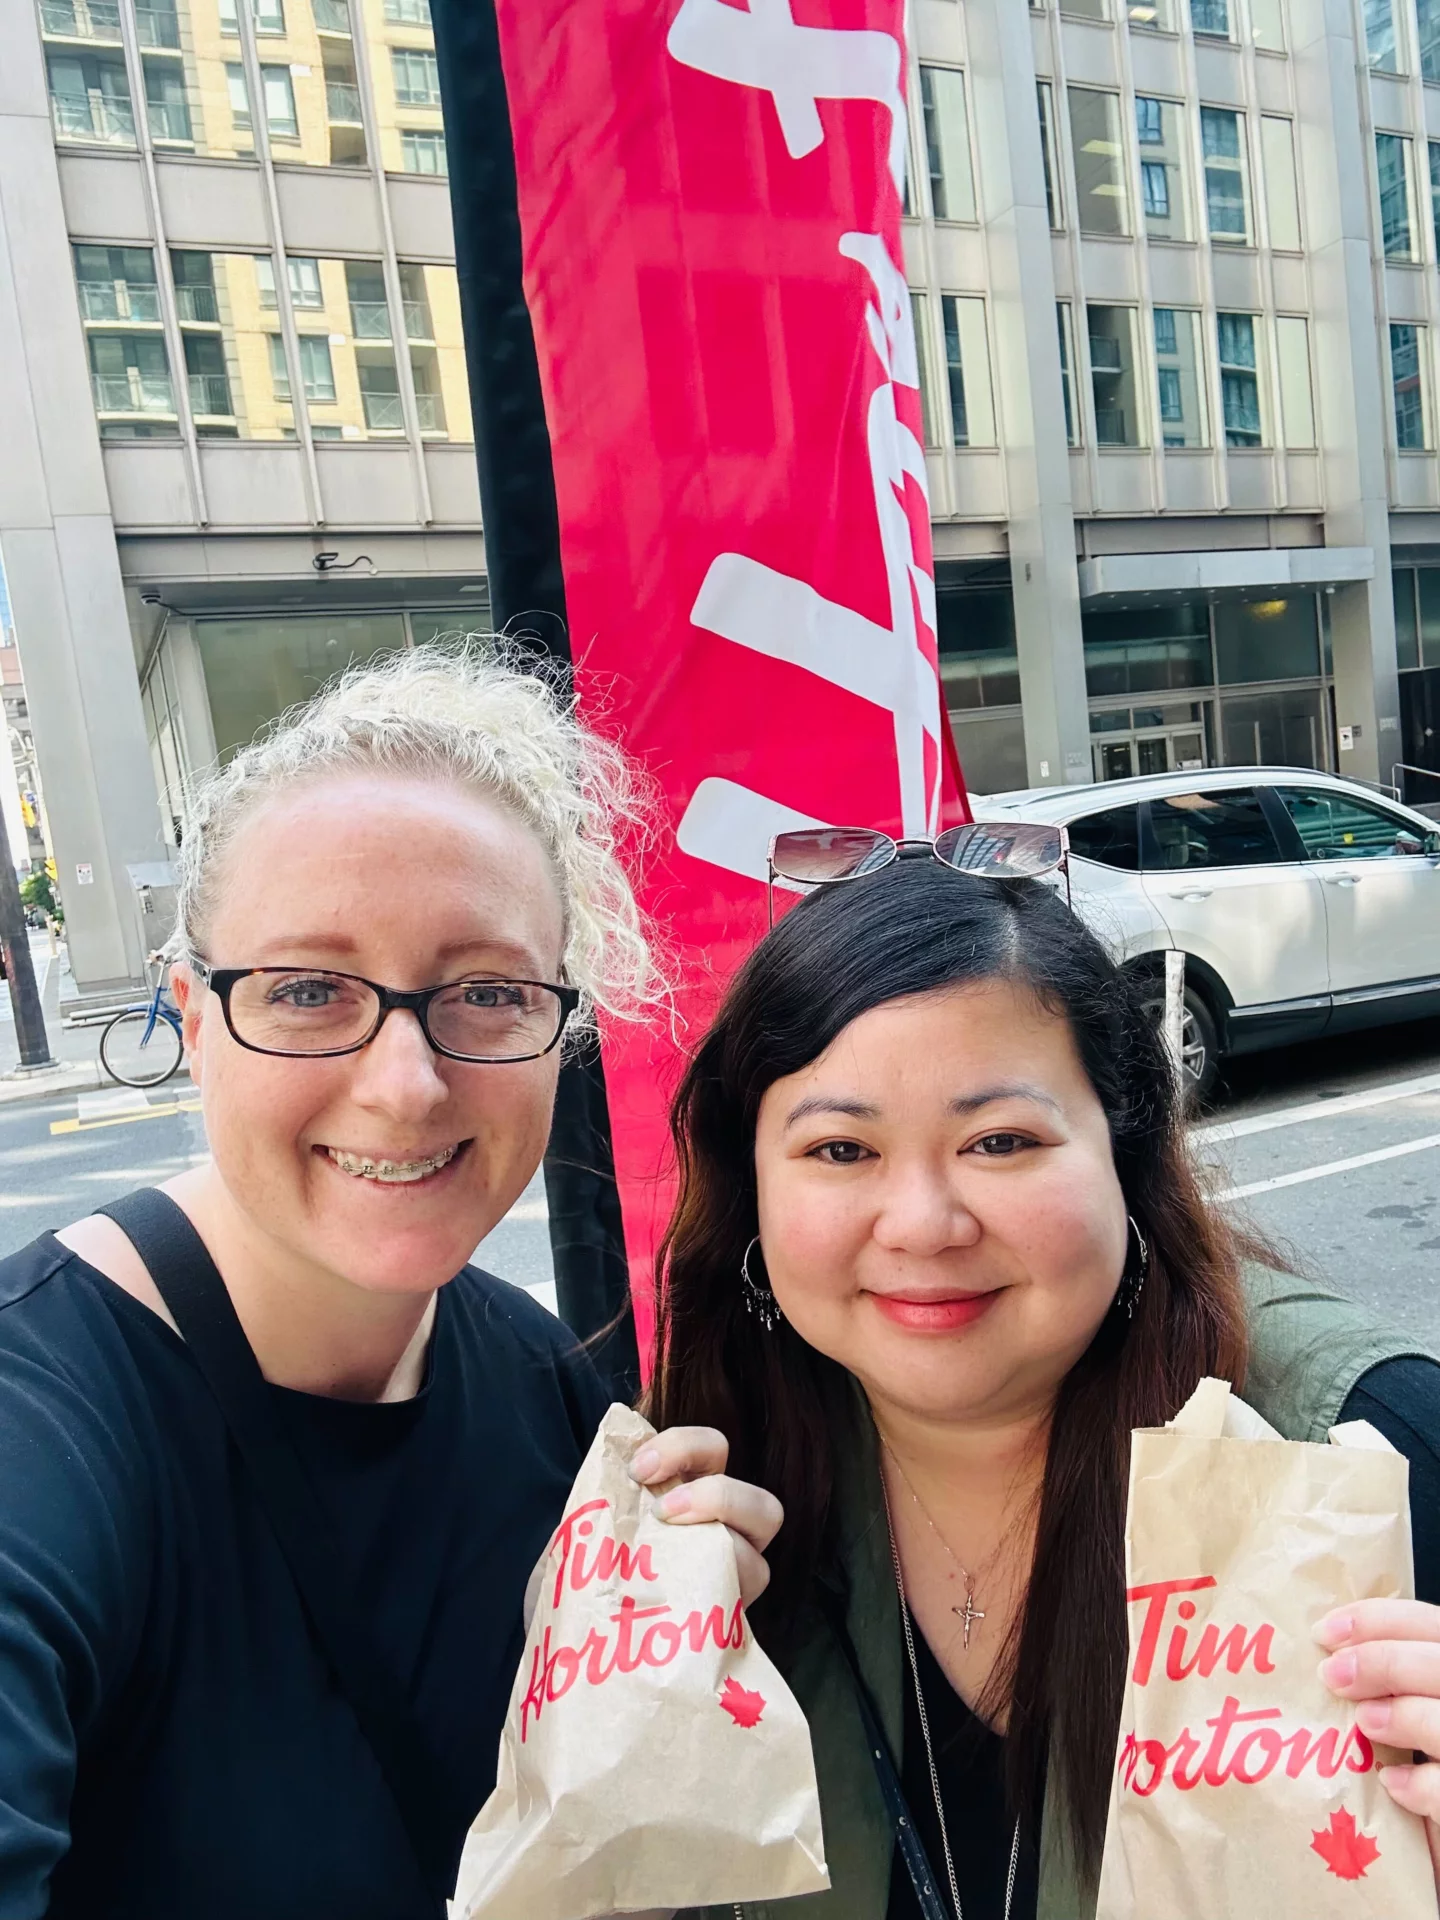 Jackie and Maria are smiling at the camera outside a cafe in Toronto. They have takeaway food (maybe donuts). Maria is visiting from the Philippines.